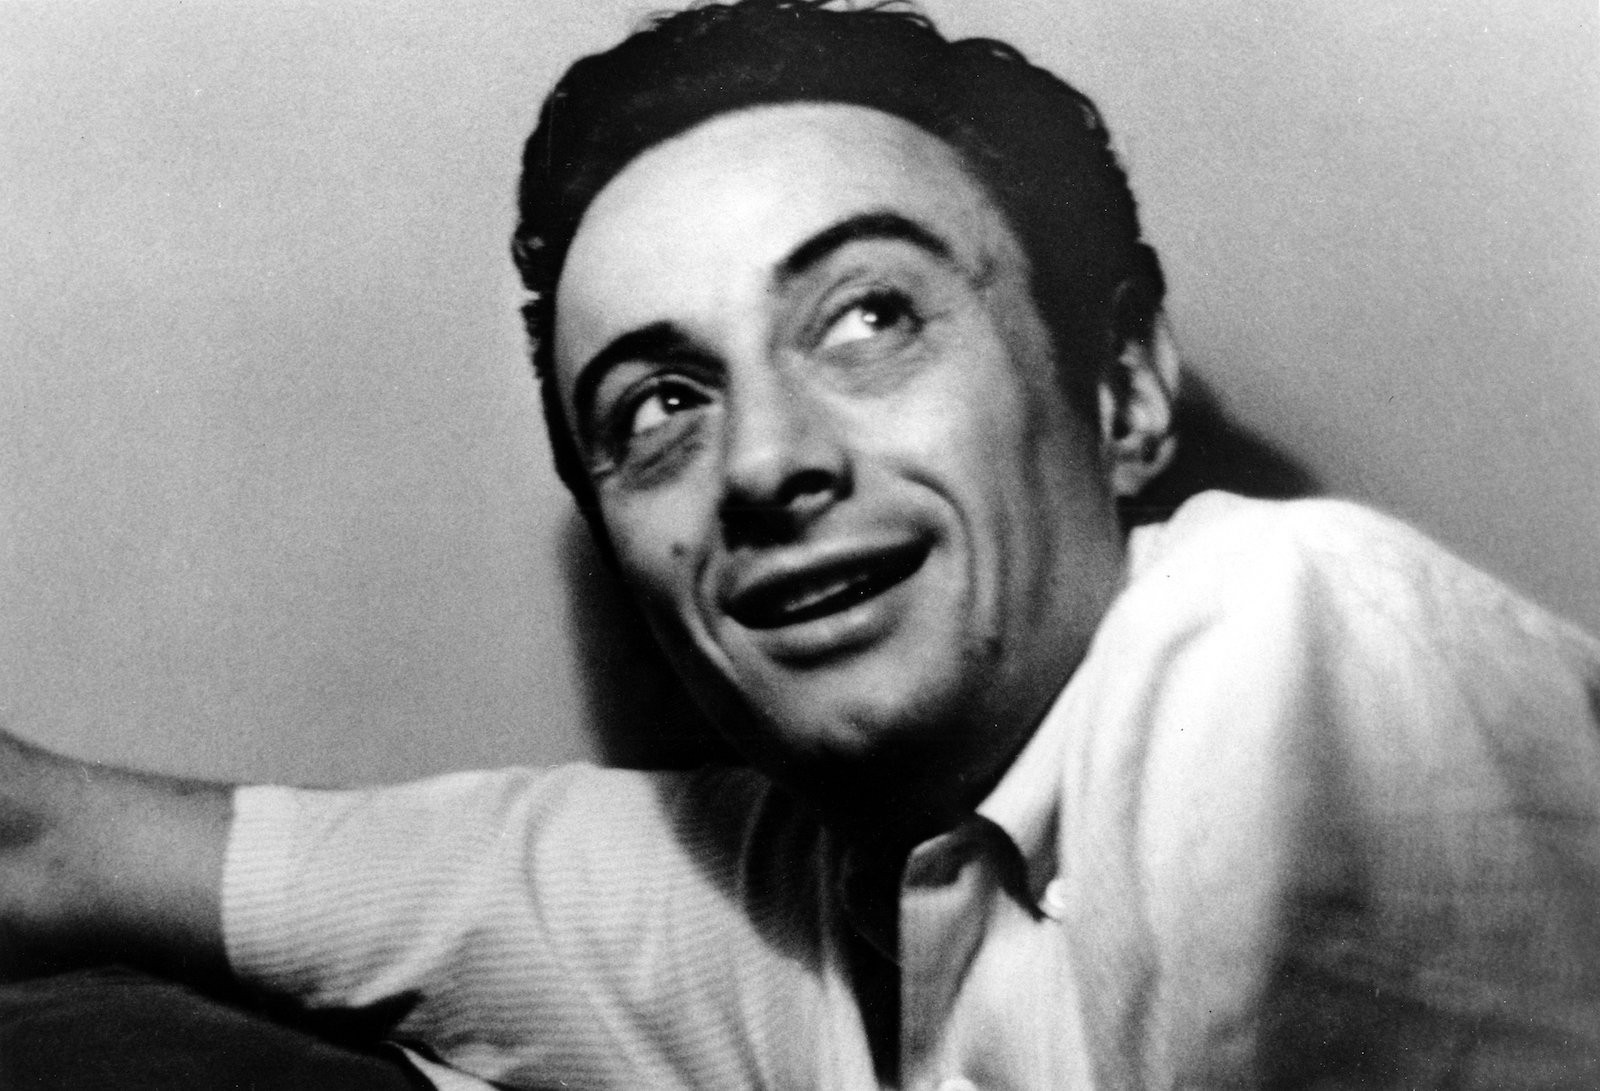 Lenny Bruce is seen smiling 